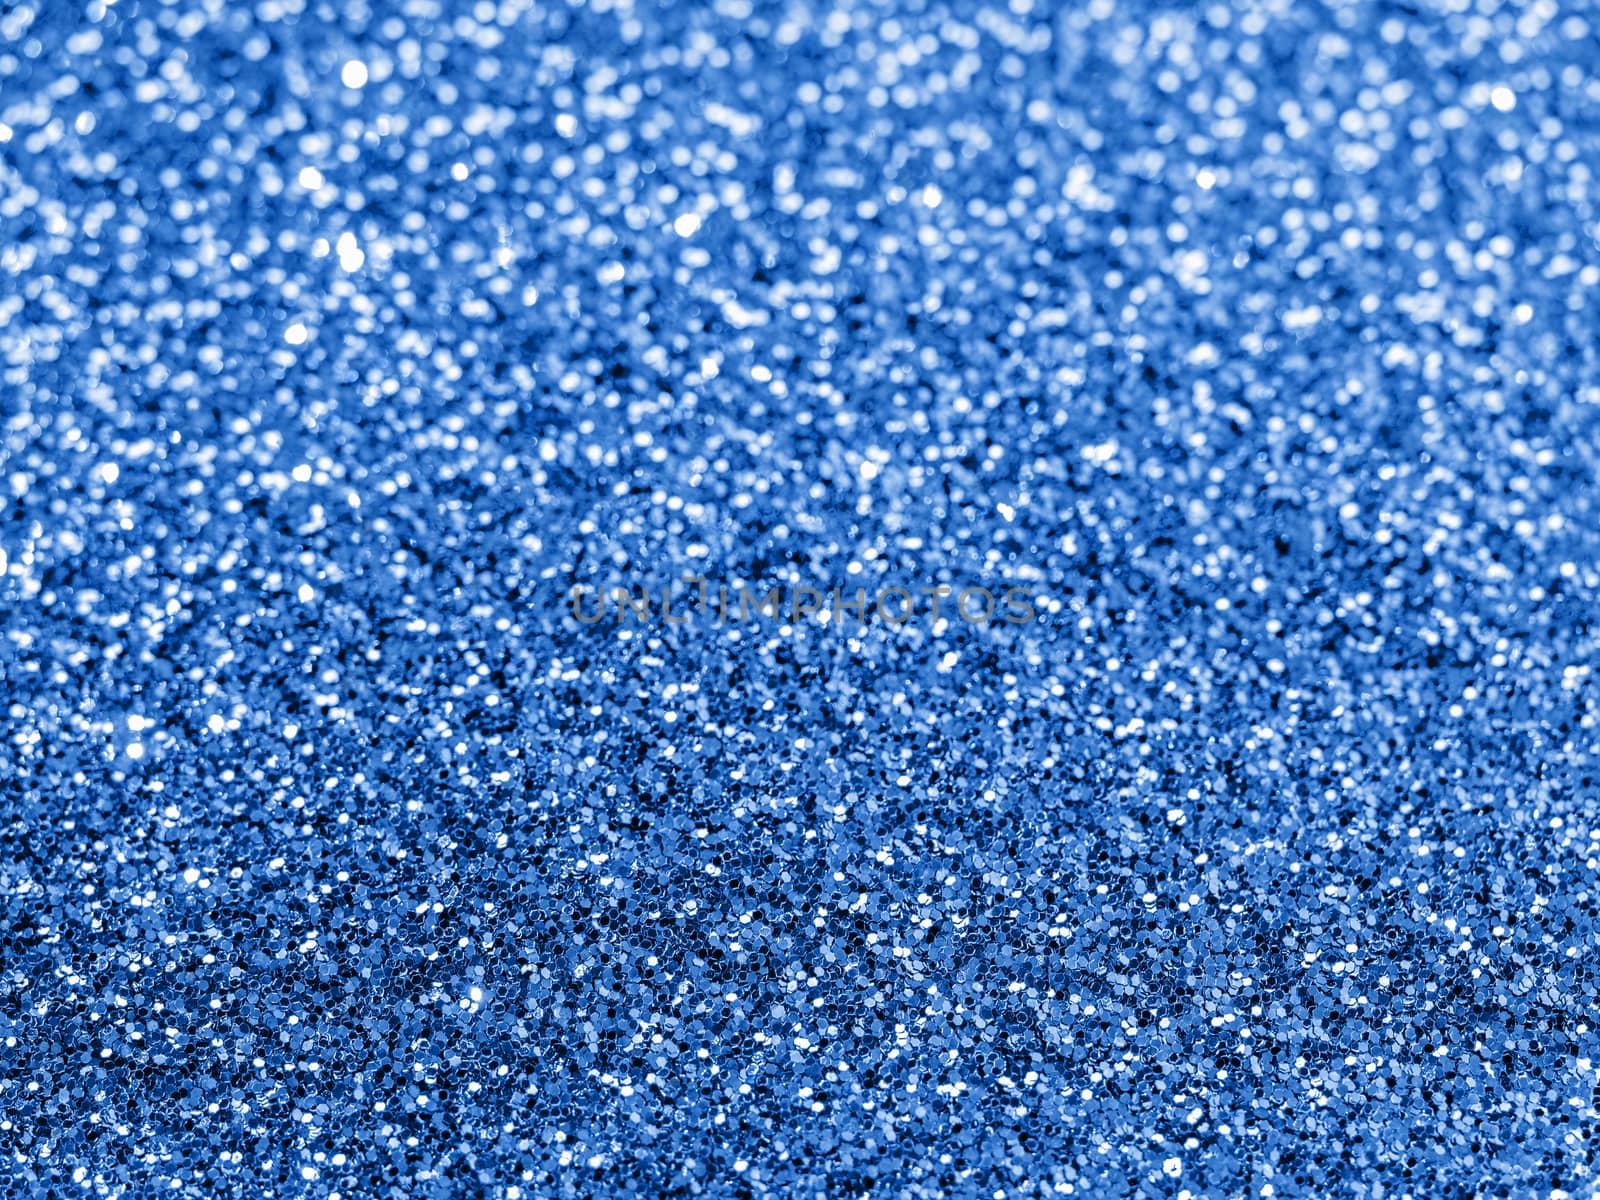 Sparkling background with bokeh made of Classic Blue 2020 color. Color of year 2020 blurred backdrop for holidays and parties. COY2020 Classic Blue concept. Copy space for text